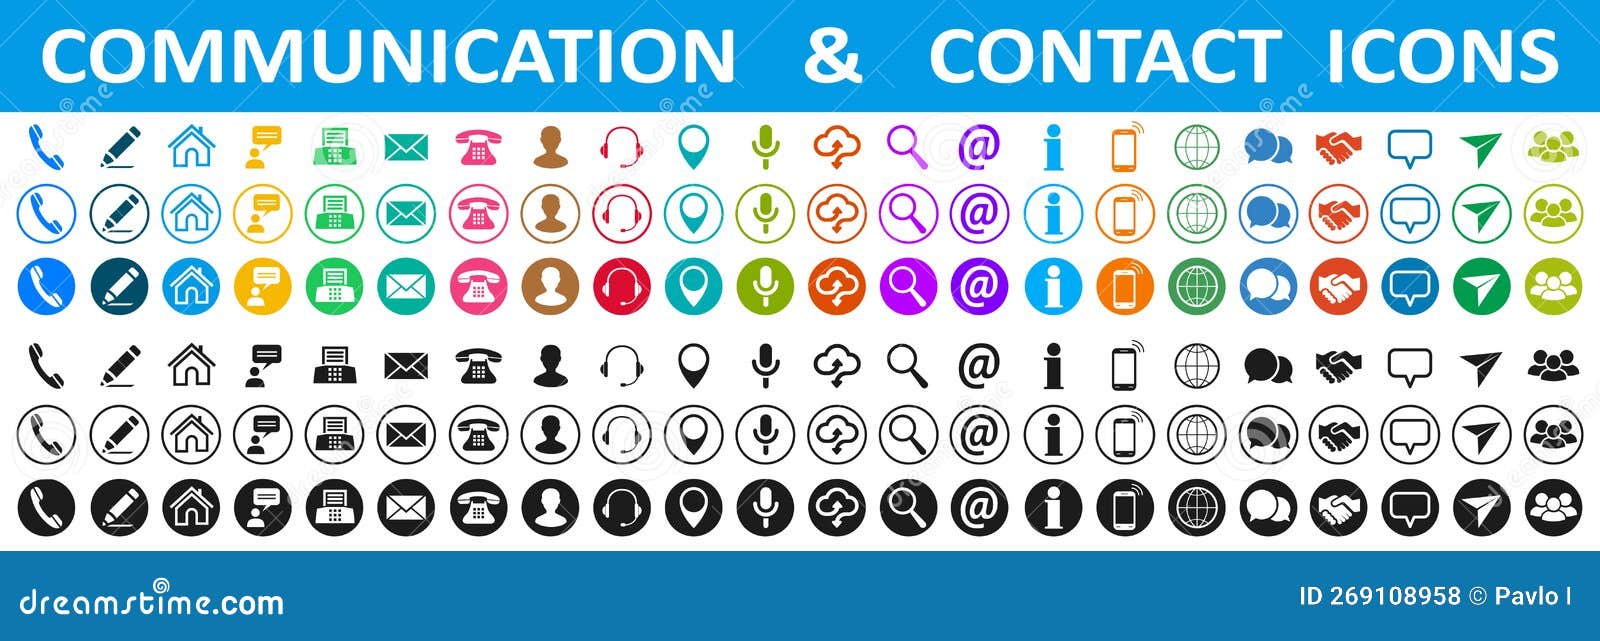 set colored and black contact icons, communication signs - 